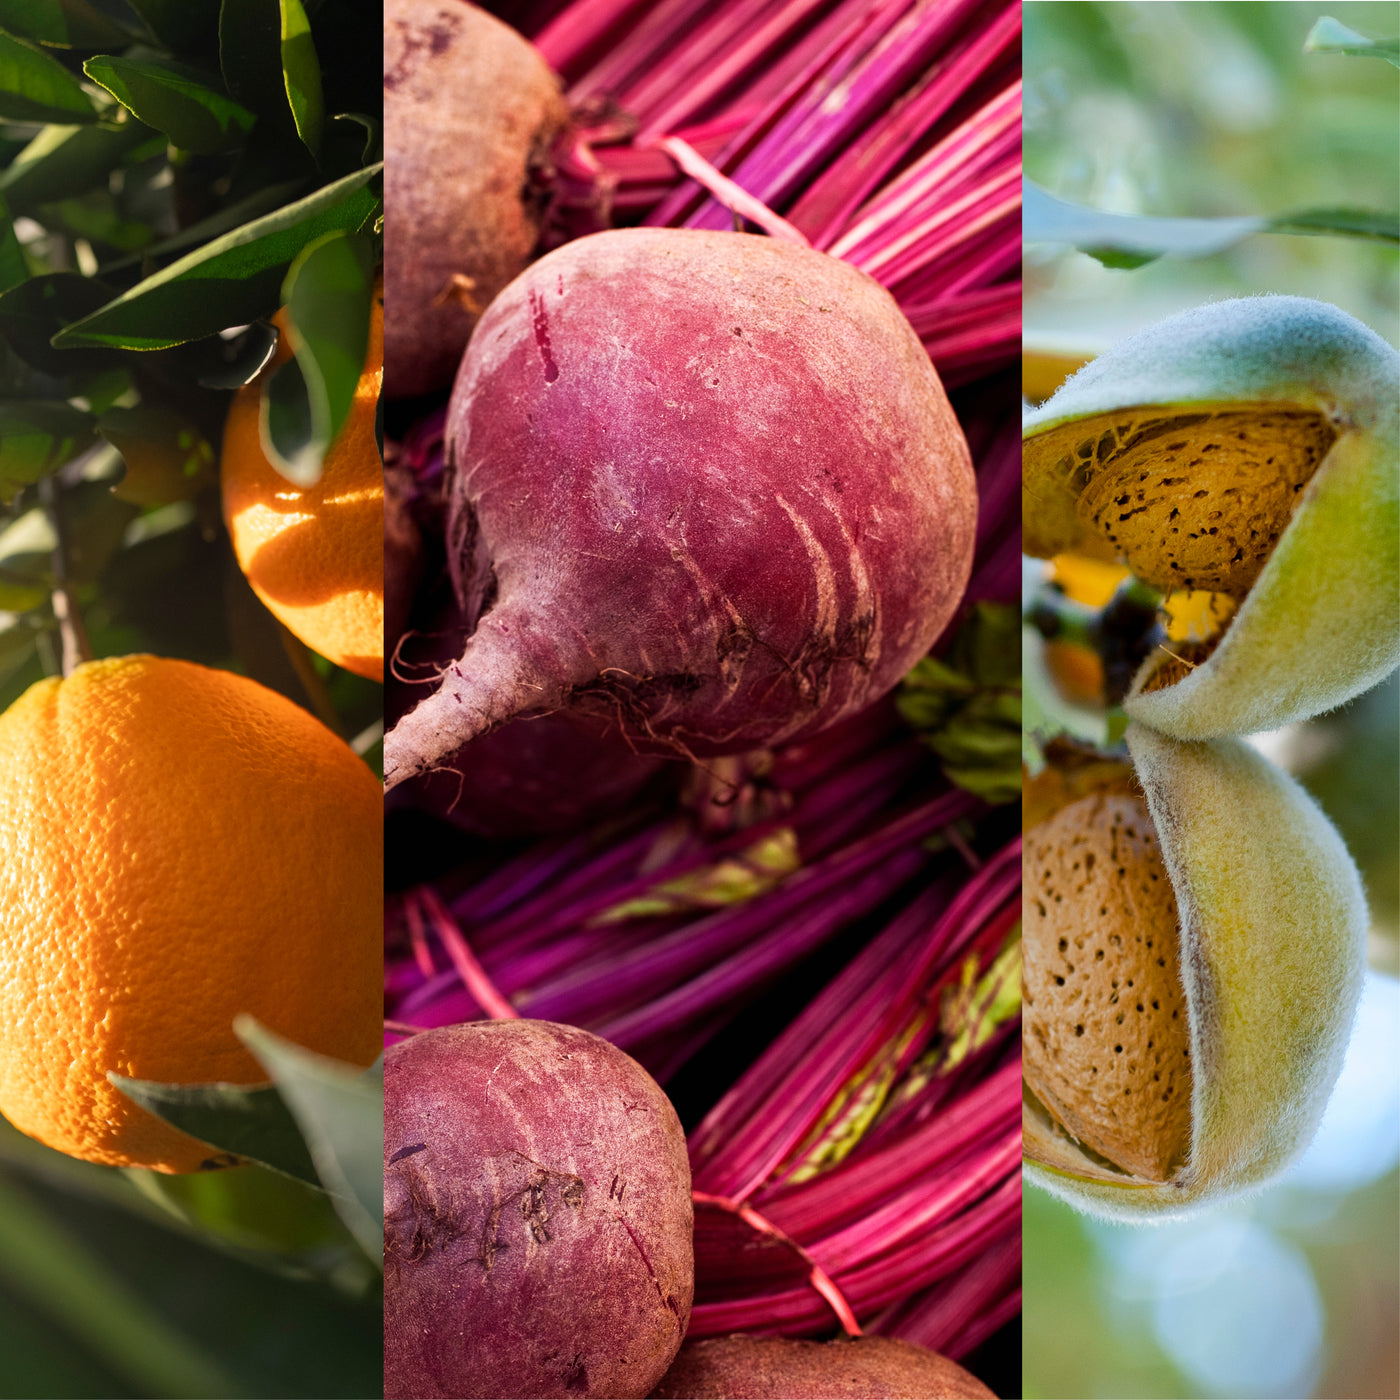 Images of oranges, beets, and almonds 